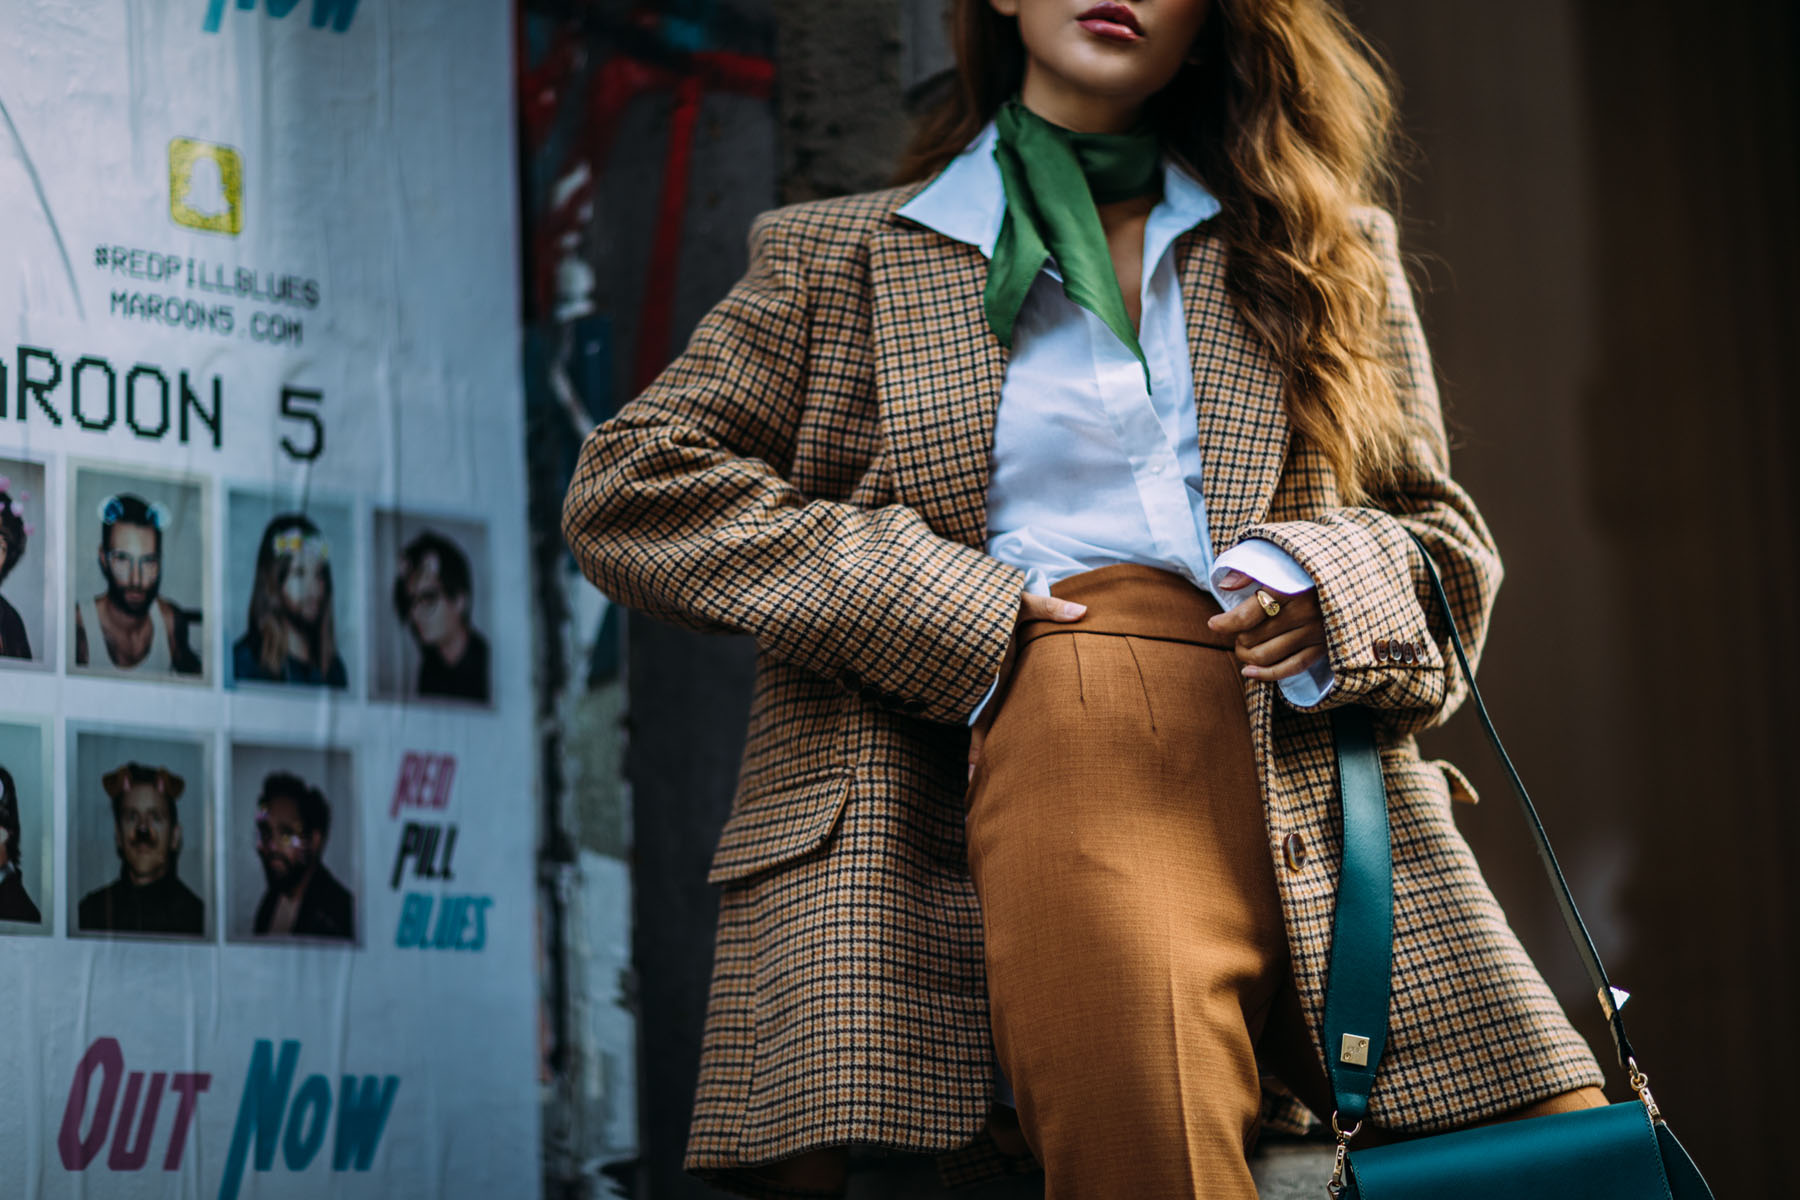 4 Key Pieces to Pull Off Menswear-Inspired Outfit // Notjessfashion.com // NYC fashion blogger, top fashion blogger, asian blogger, oversized blazer, plaid blazer, menswear inspired fashion, jessica wang, green accessories